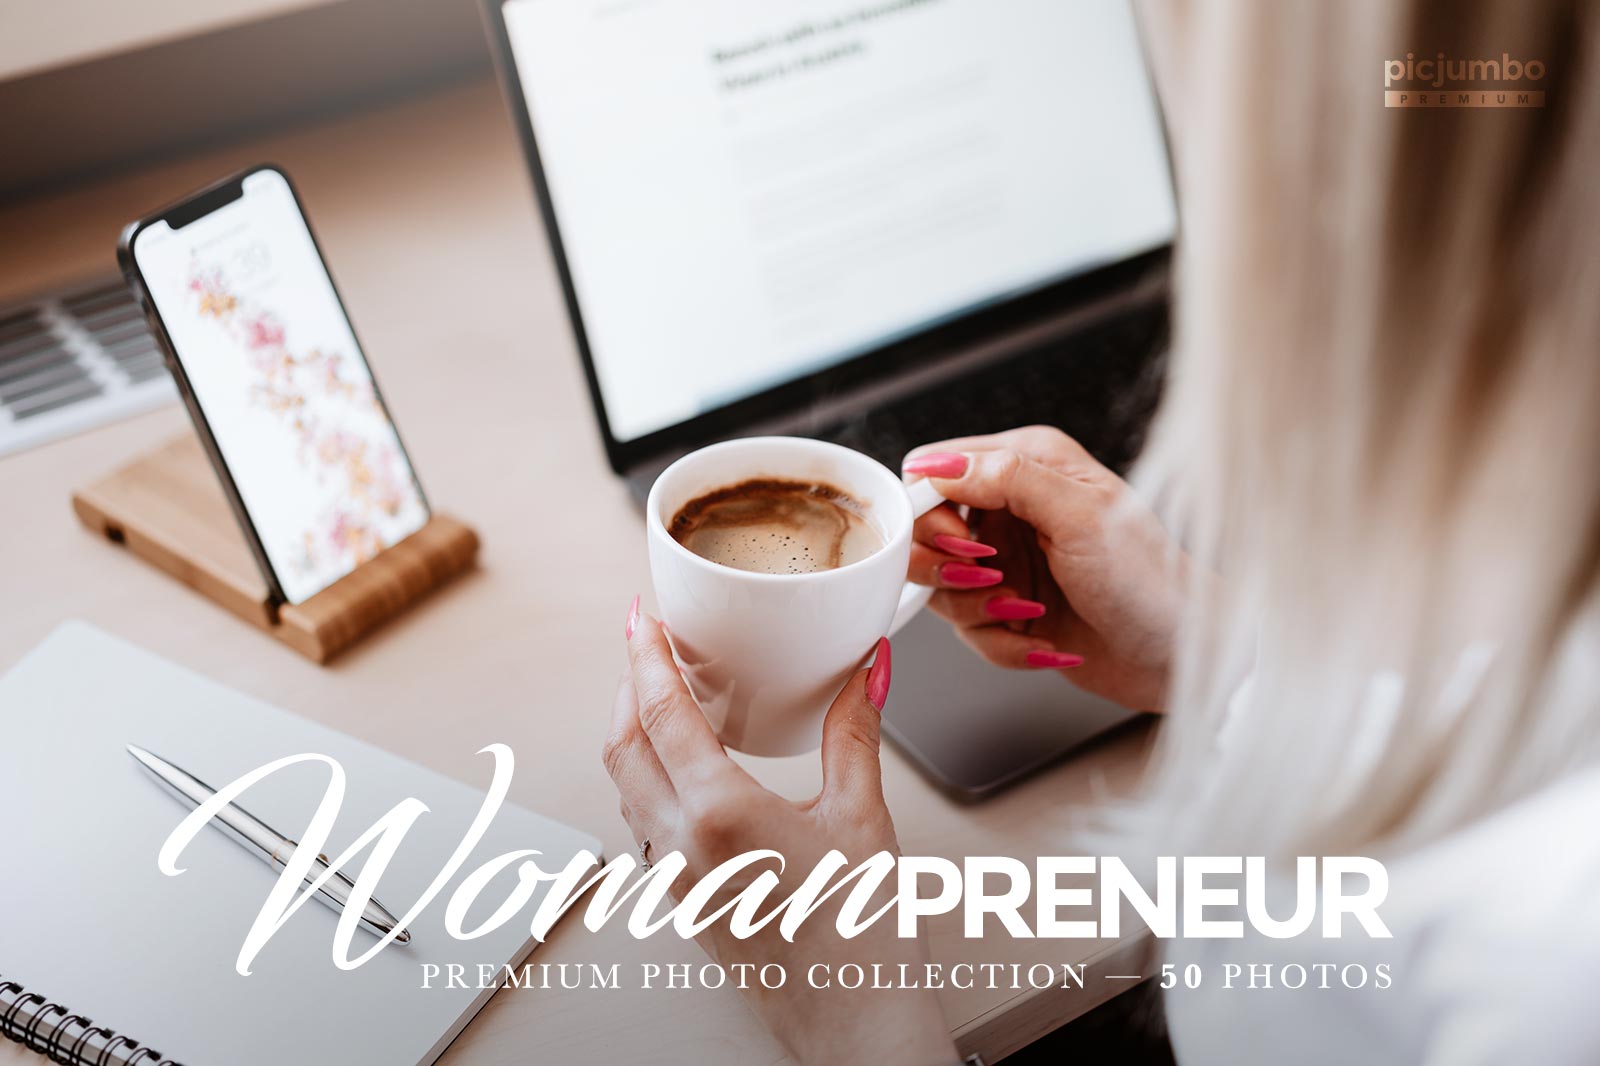 Download hi-res stock photos from our Womanpreneur PREMIUM Collection!